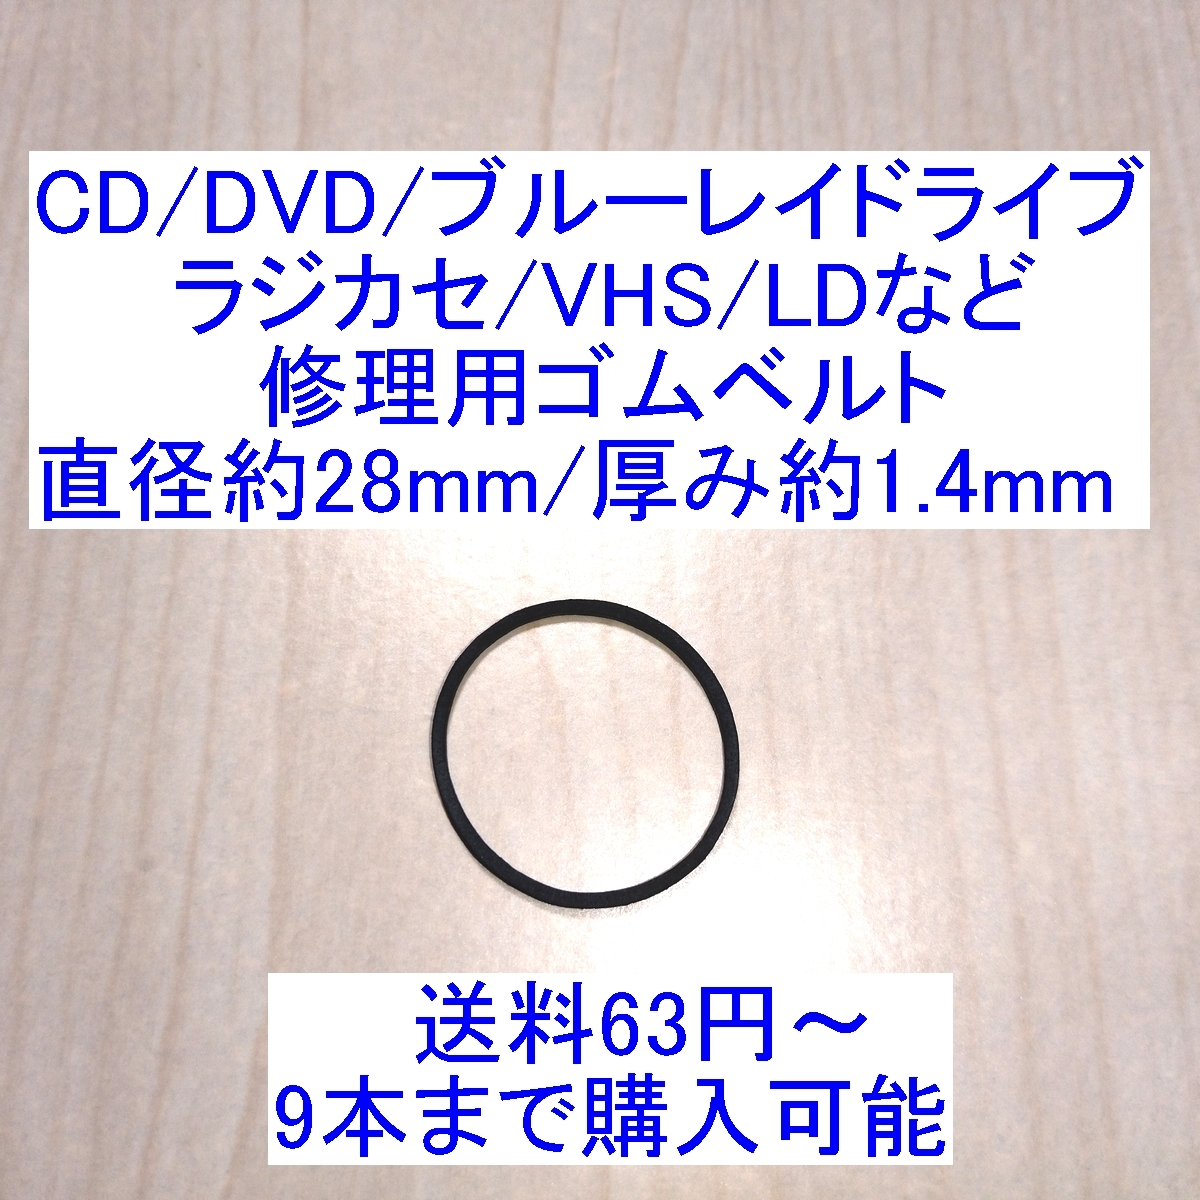 [ postage 63 jpy ~/ prompt decision ]CD/DVD/ Blue-ray Drive / radio-cassette / cassette deck /VHS/MD/LD for repair / for repair rubber belt diameter approximately 28mm/ thickness approximately 1.4mm